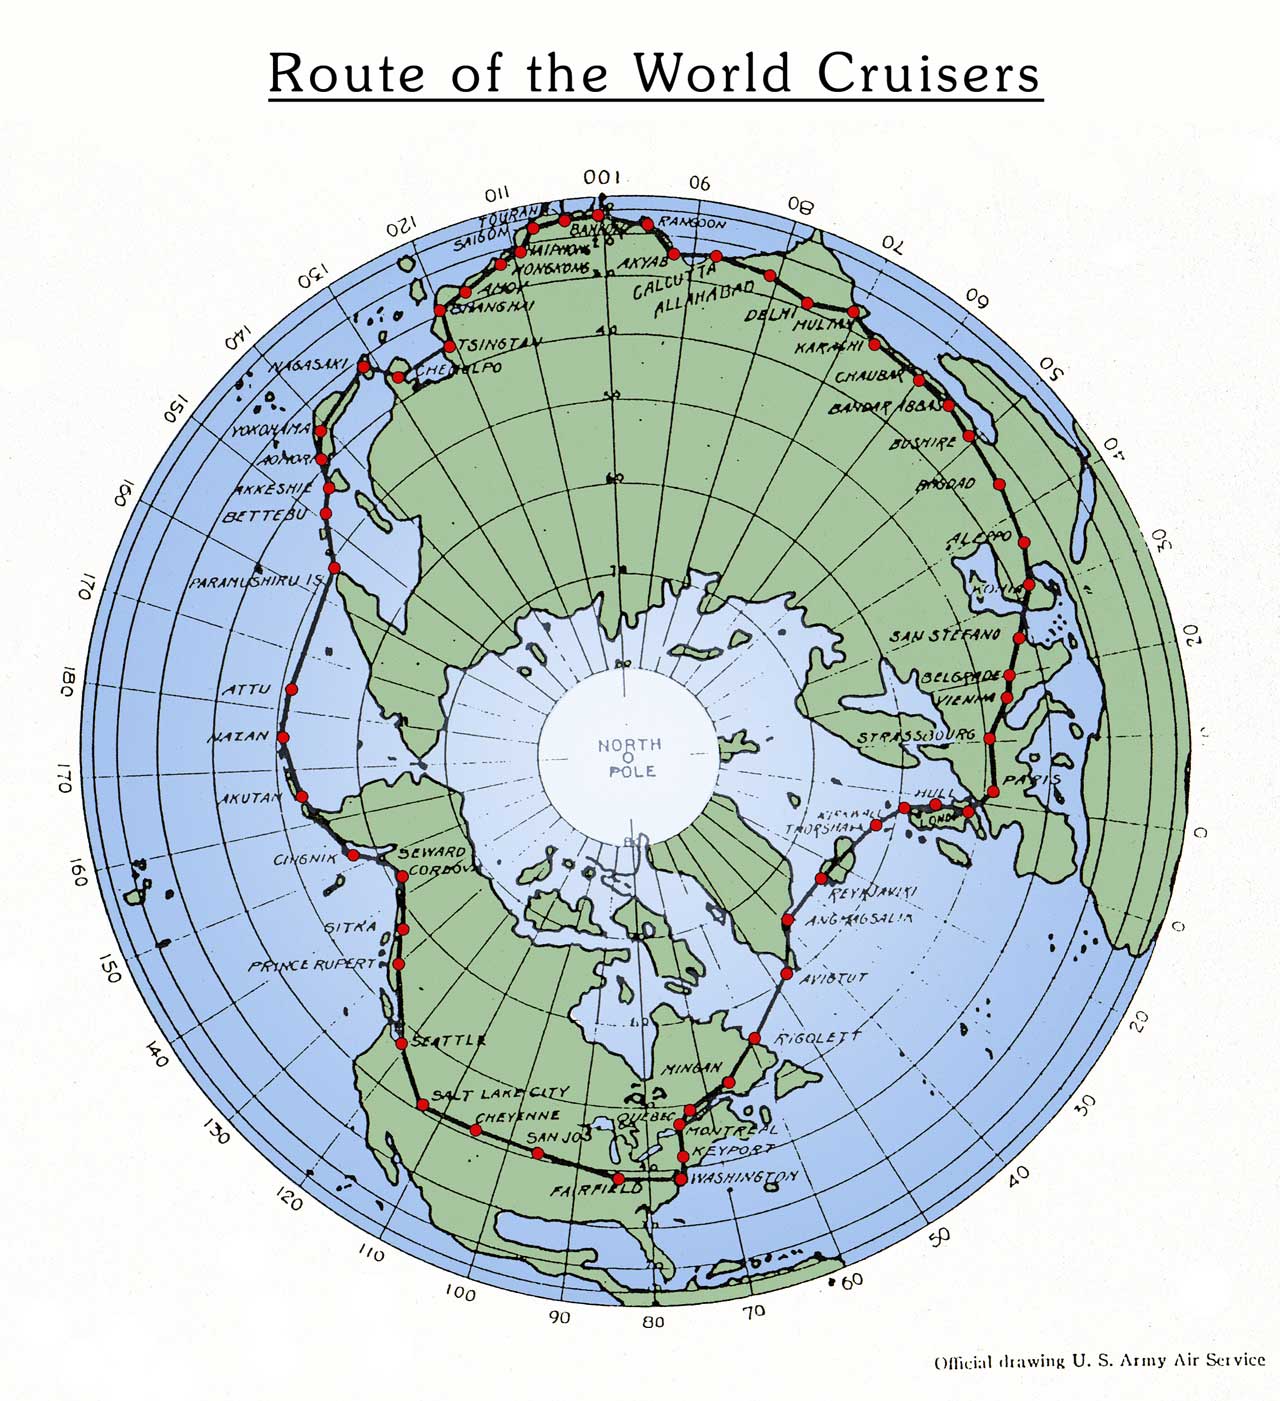  The route of the World Cruisers. 